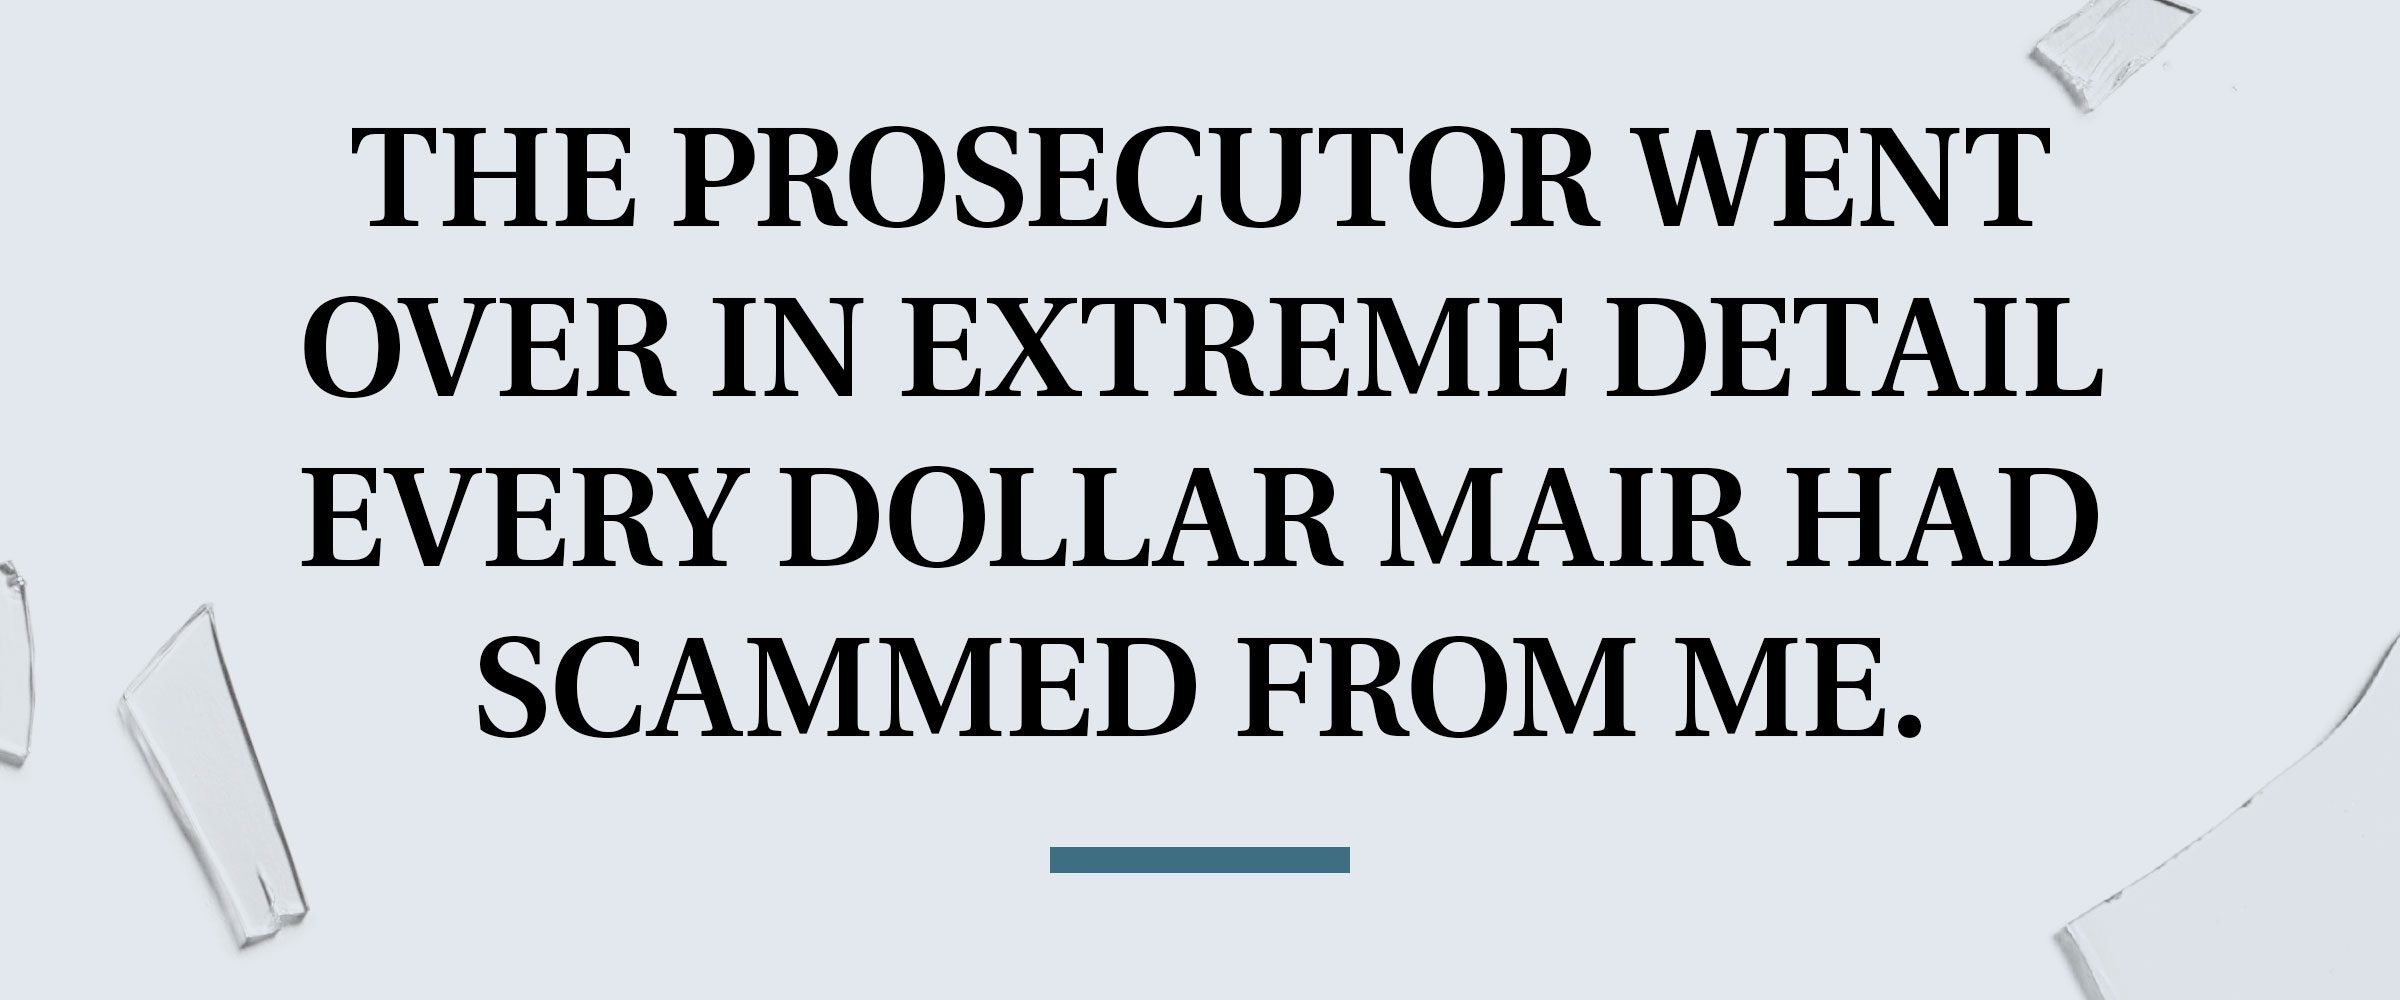 pull quote text. the prosecutor went over in extreme detail every dollar mair had scammed from me.